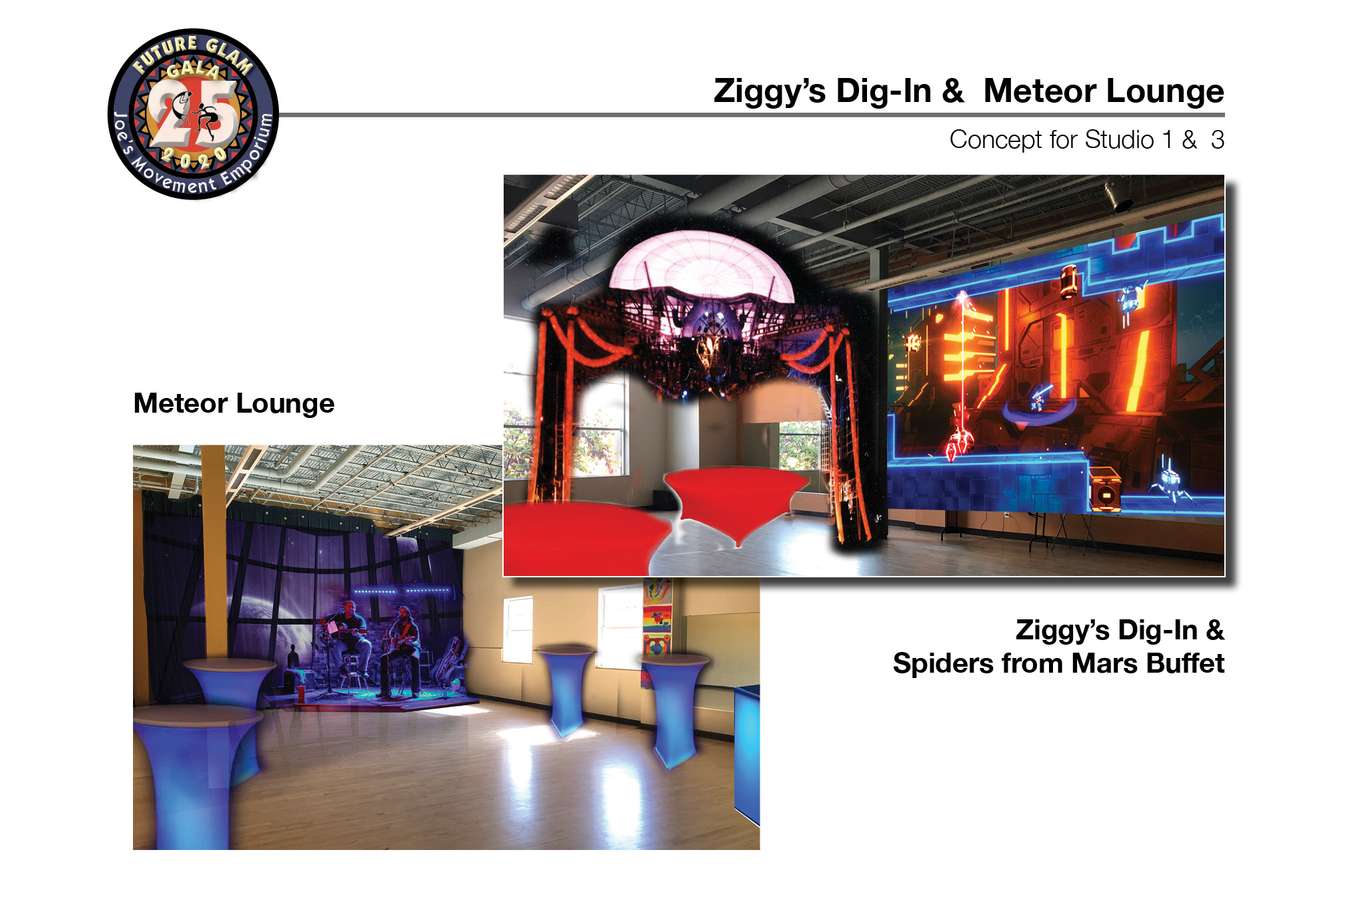 2H J-Glam : Ziggy's Dig-In and the Spiders from Mars Buffet borrows from David Bowie to bring a Glam Rock / Sci-Fi dining experience to the Starship Emporium. The Meteor Lounge evokes the Starship Emporium's holideck where the crew goes to kick back and chill with hand crafted cocktails. One wall offers a peek into the cosmos.  